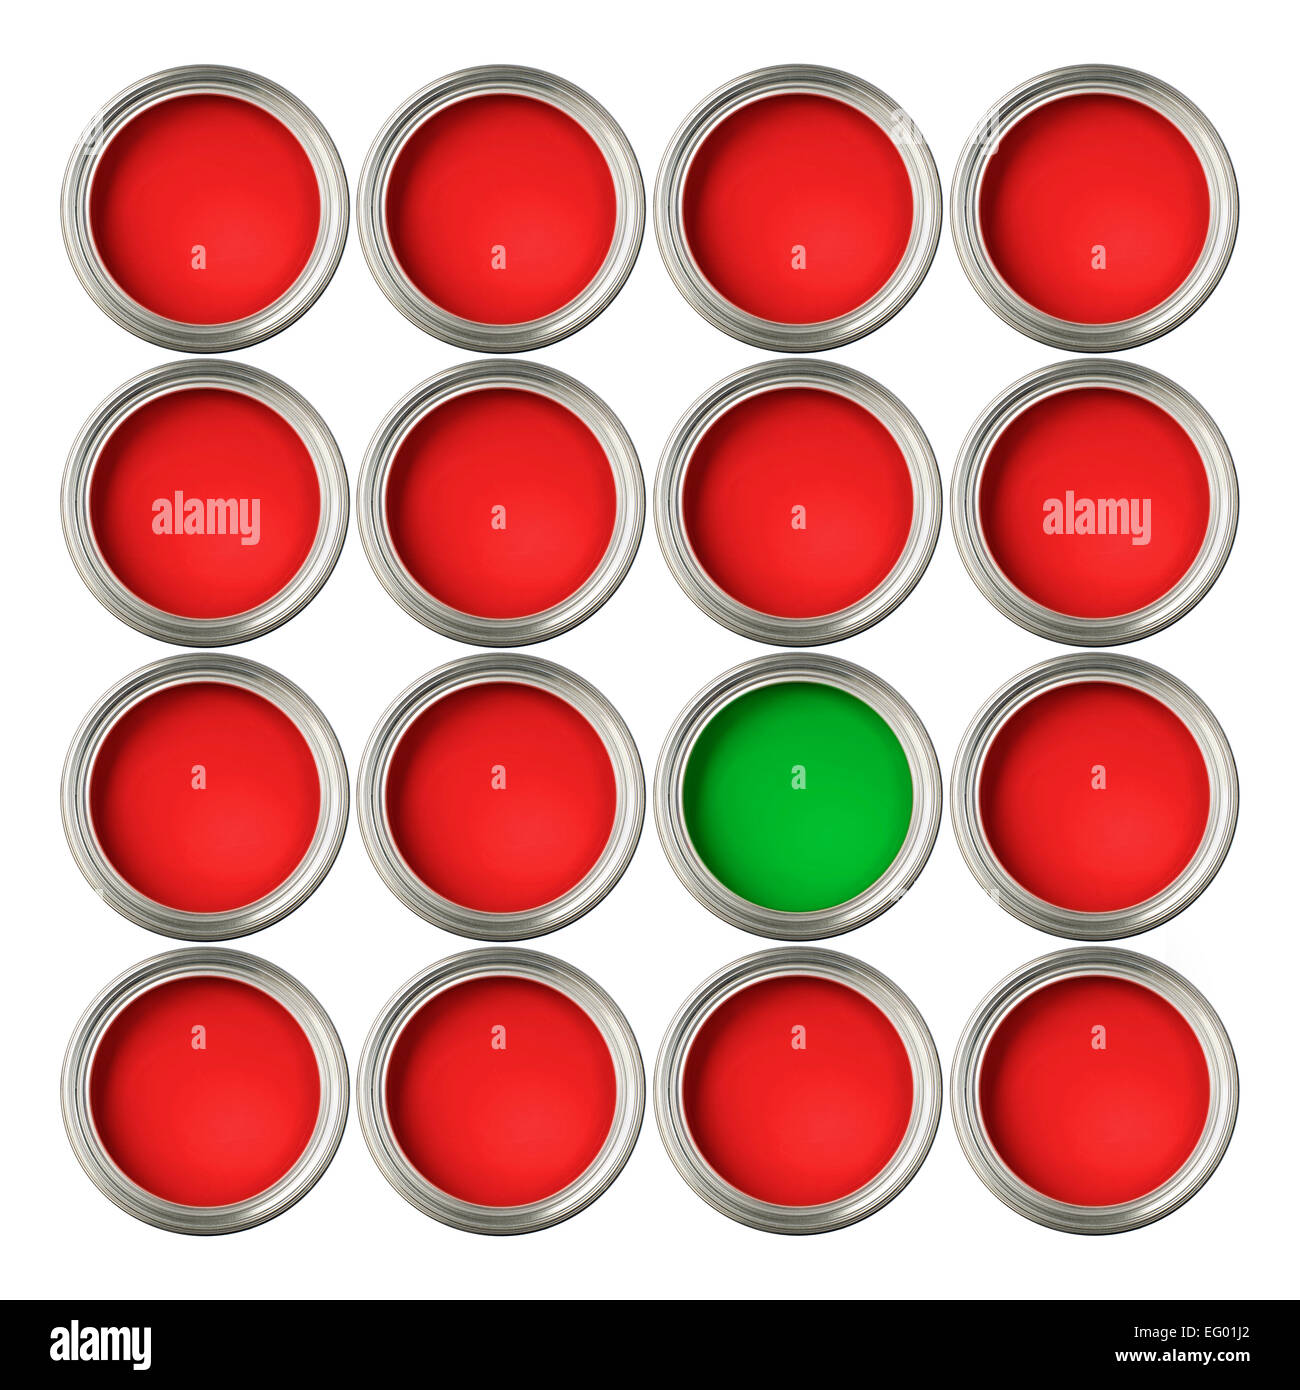 concept image of paint tins implying odd one out or stop / go Stock Photo